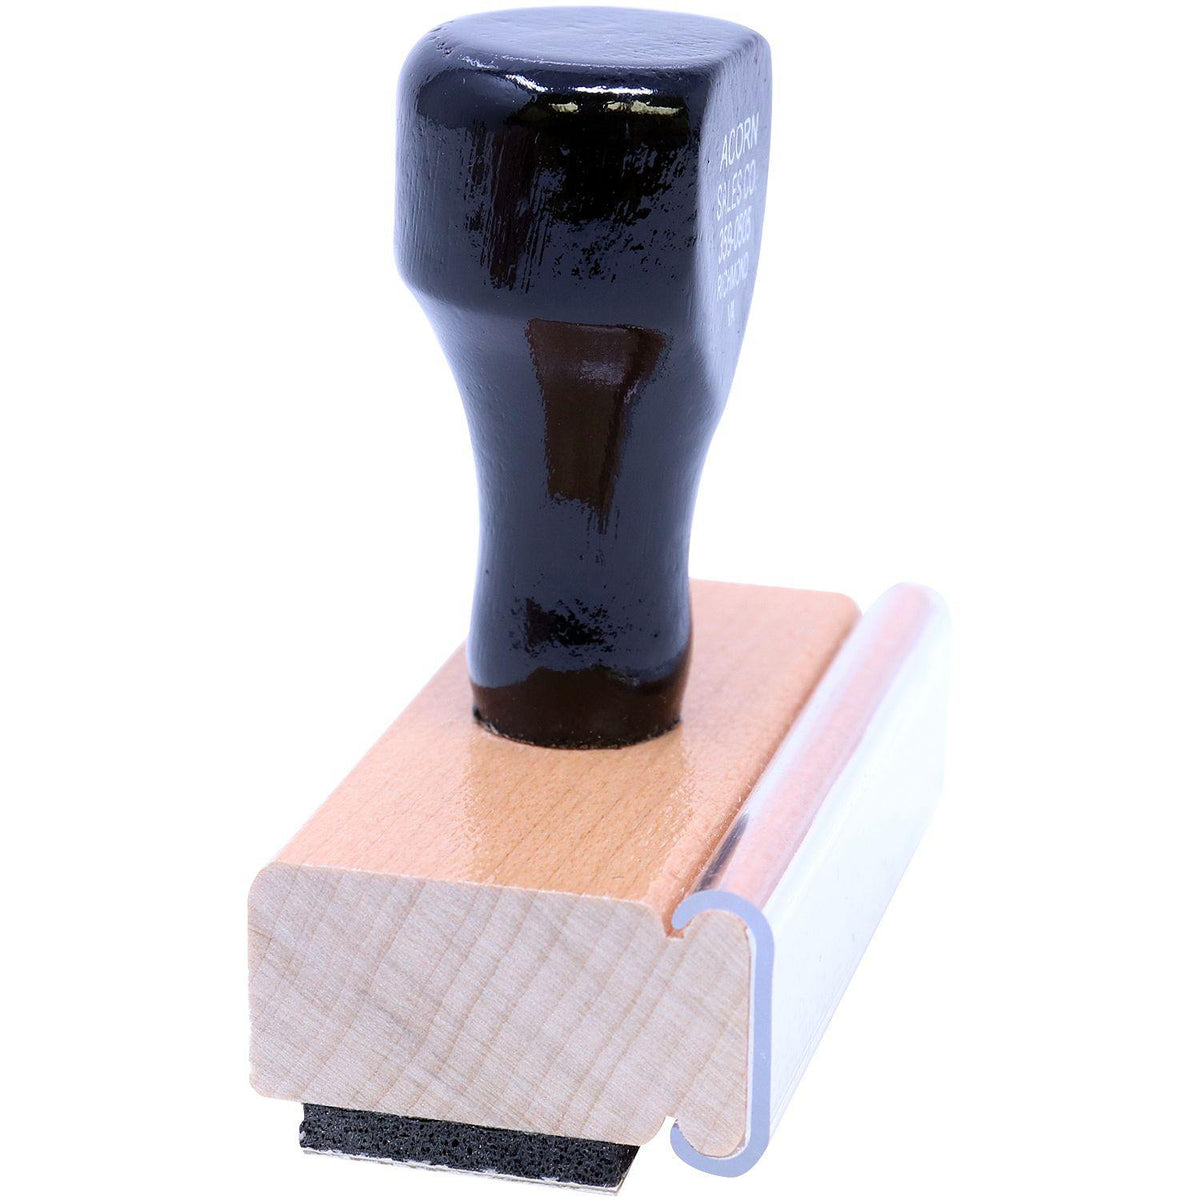 Side View of This Envelop has been Sealed Rubber Stamp at an Angle